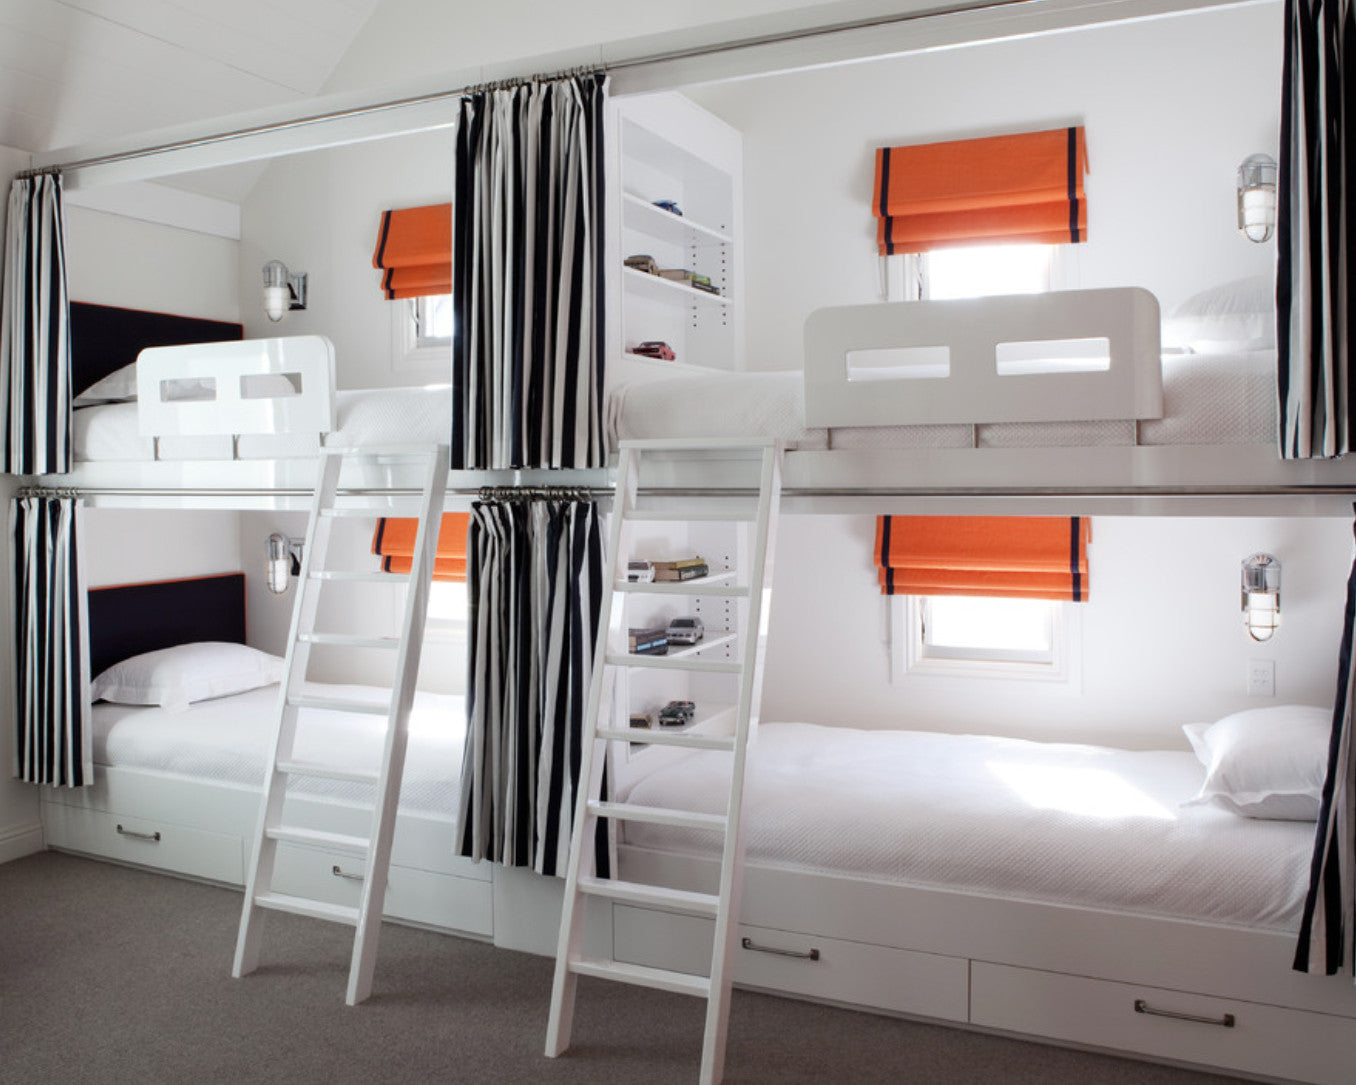 Beautiful Beds: 14 Amazing Bunk Bed Designs